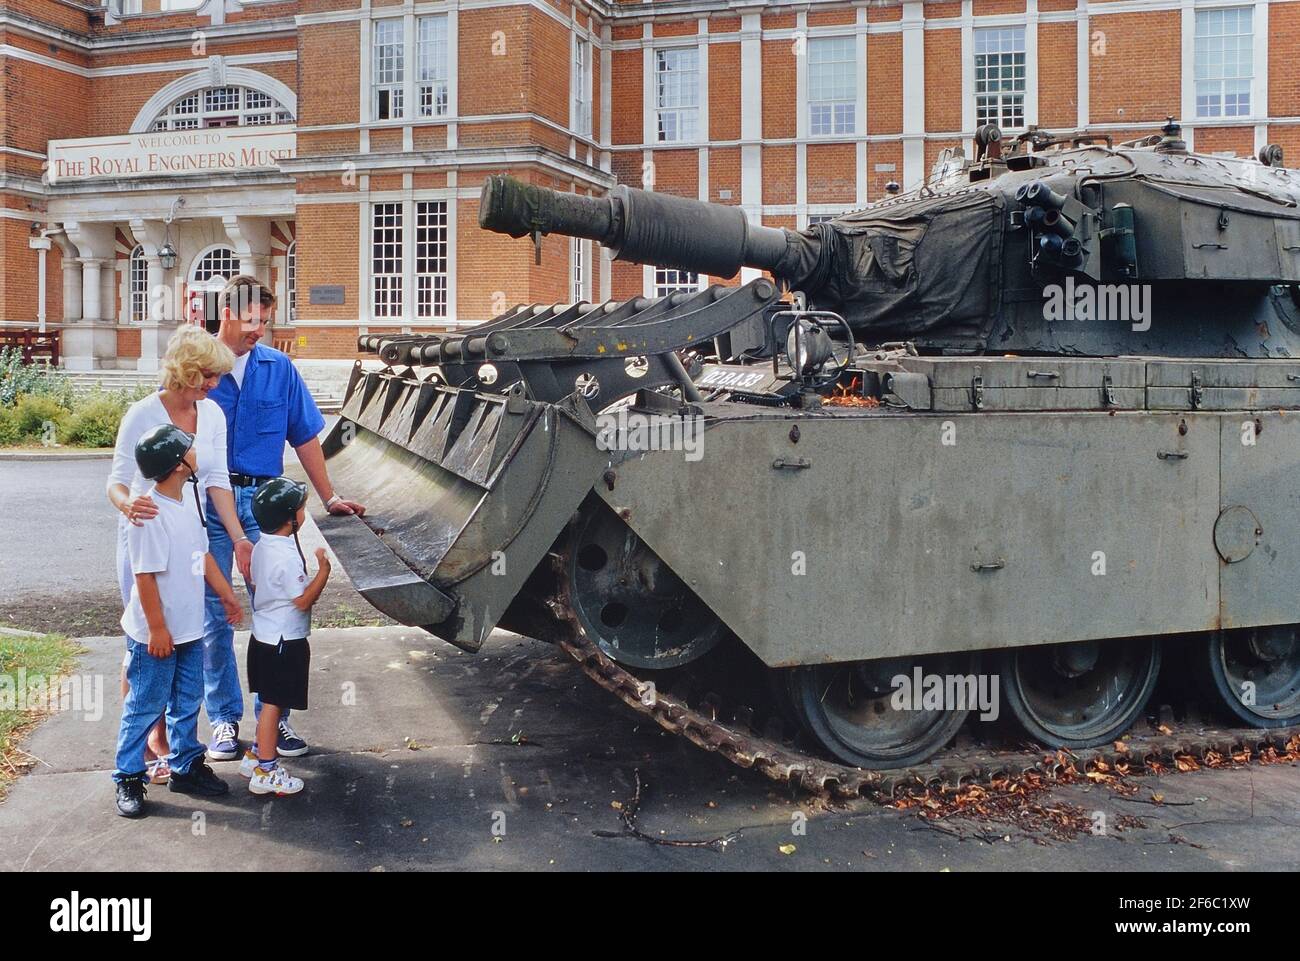 A family looking at a Centurion AVRE tank outside The Royal Engineers Museum, Library and Archive, Gillingham, Kent, England, UK Stock Photo